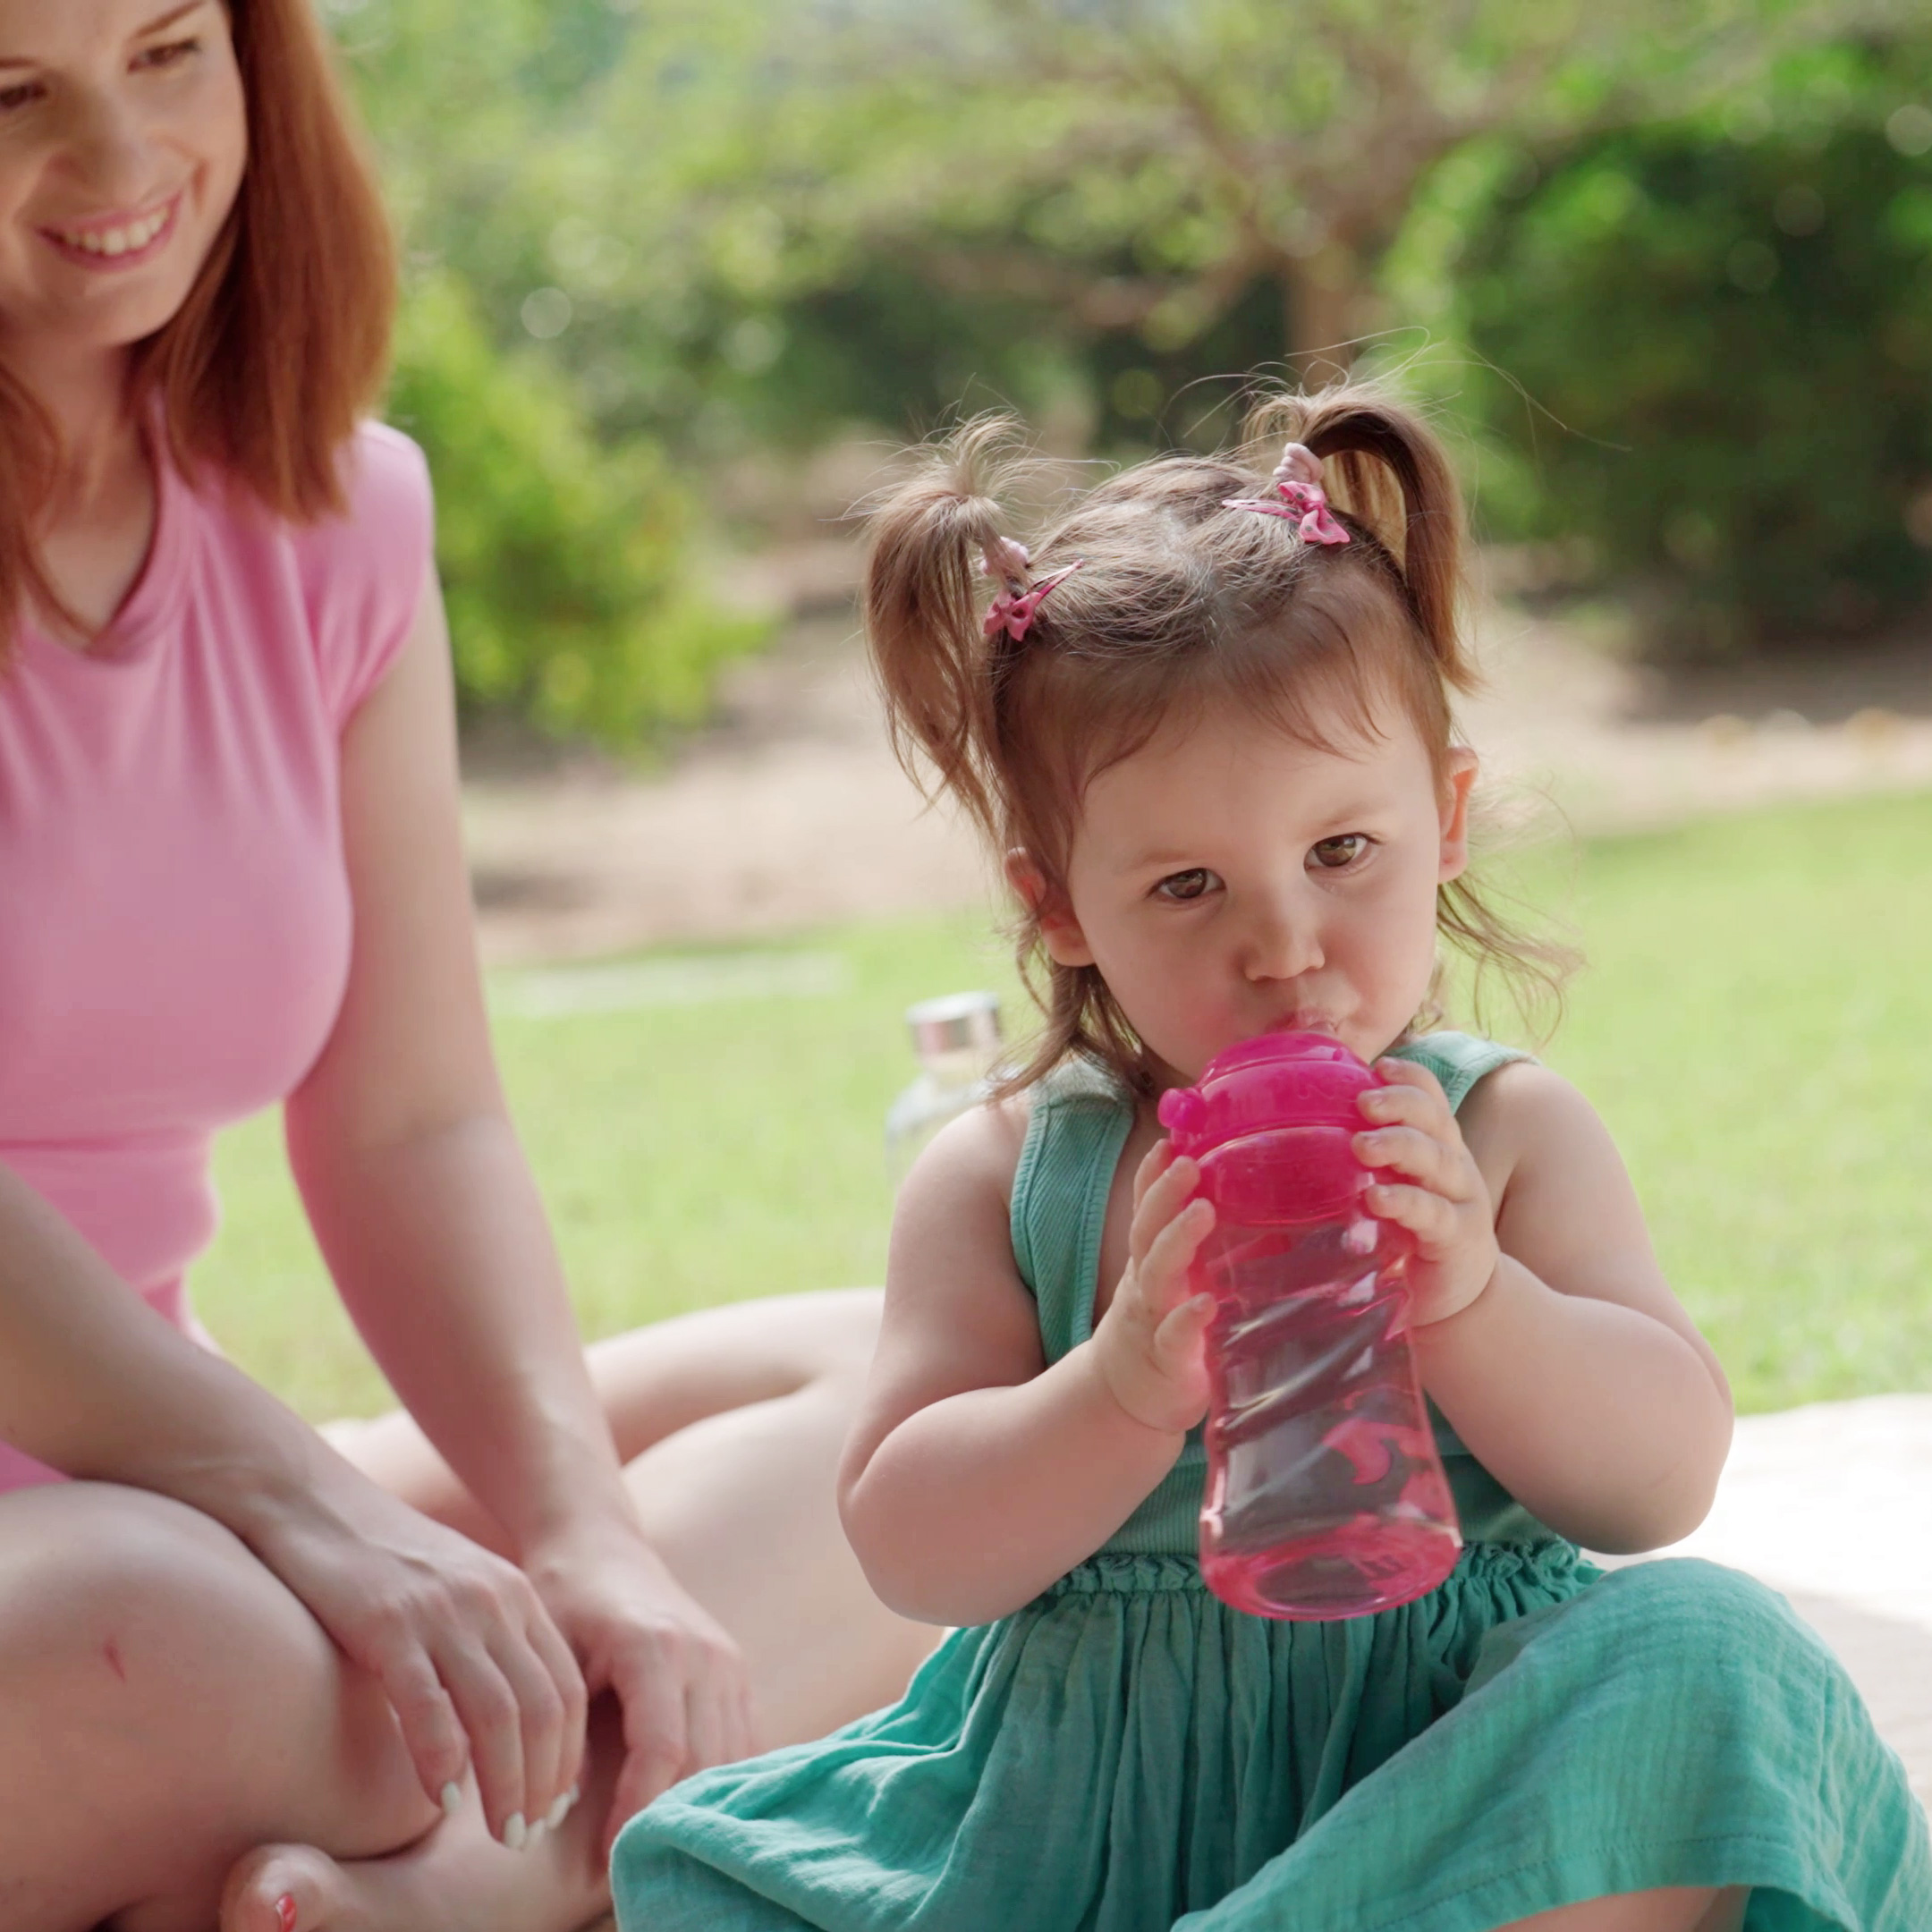 Child drinking from Nuby bottle in the outdoor